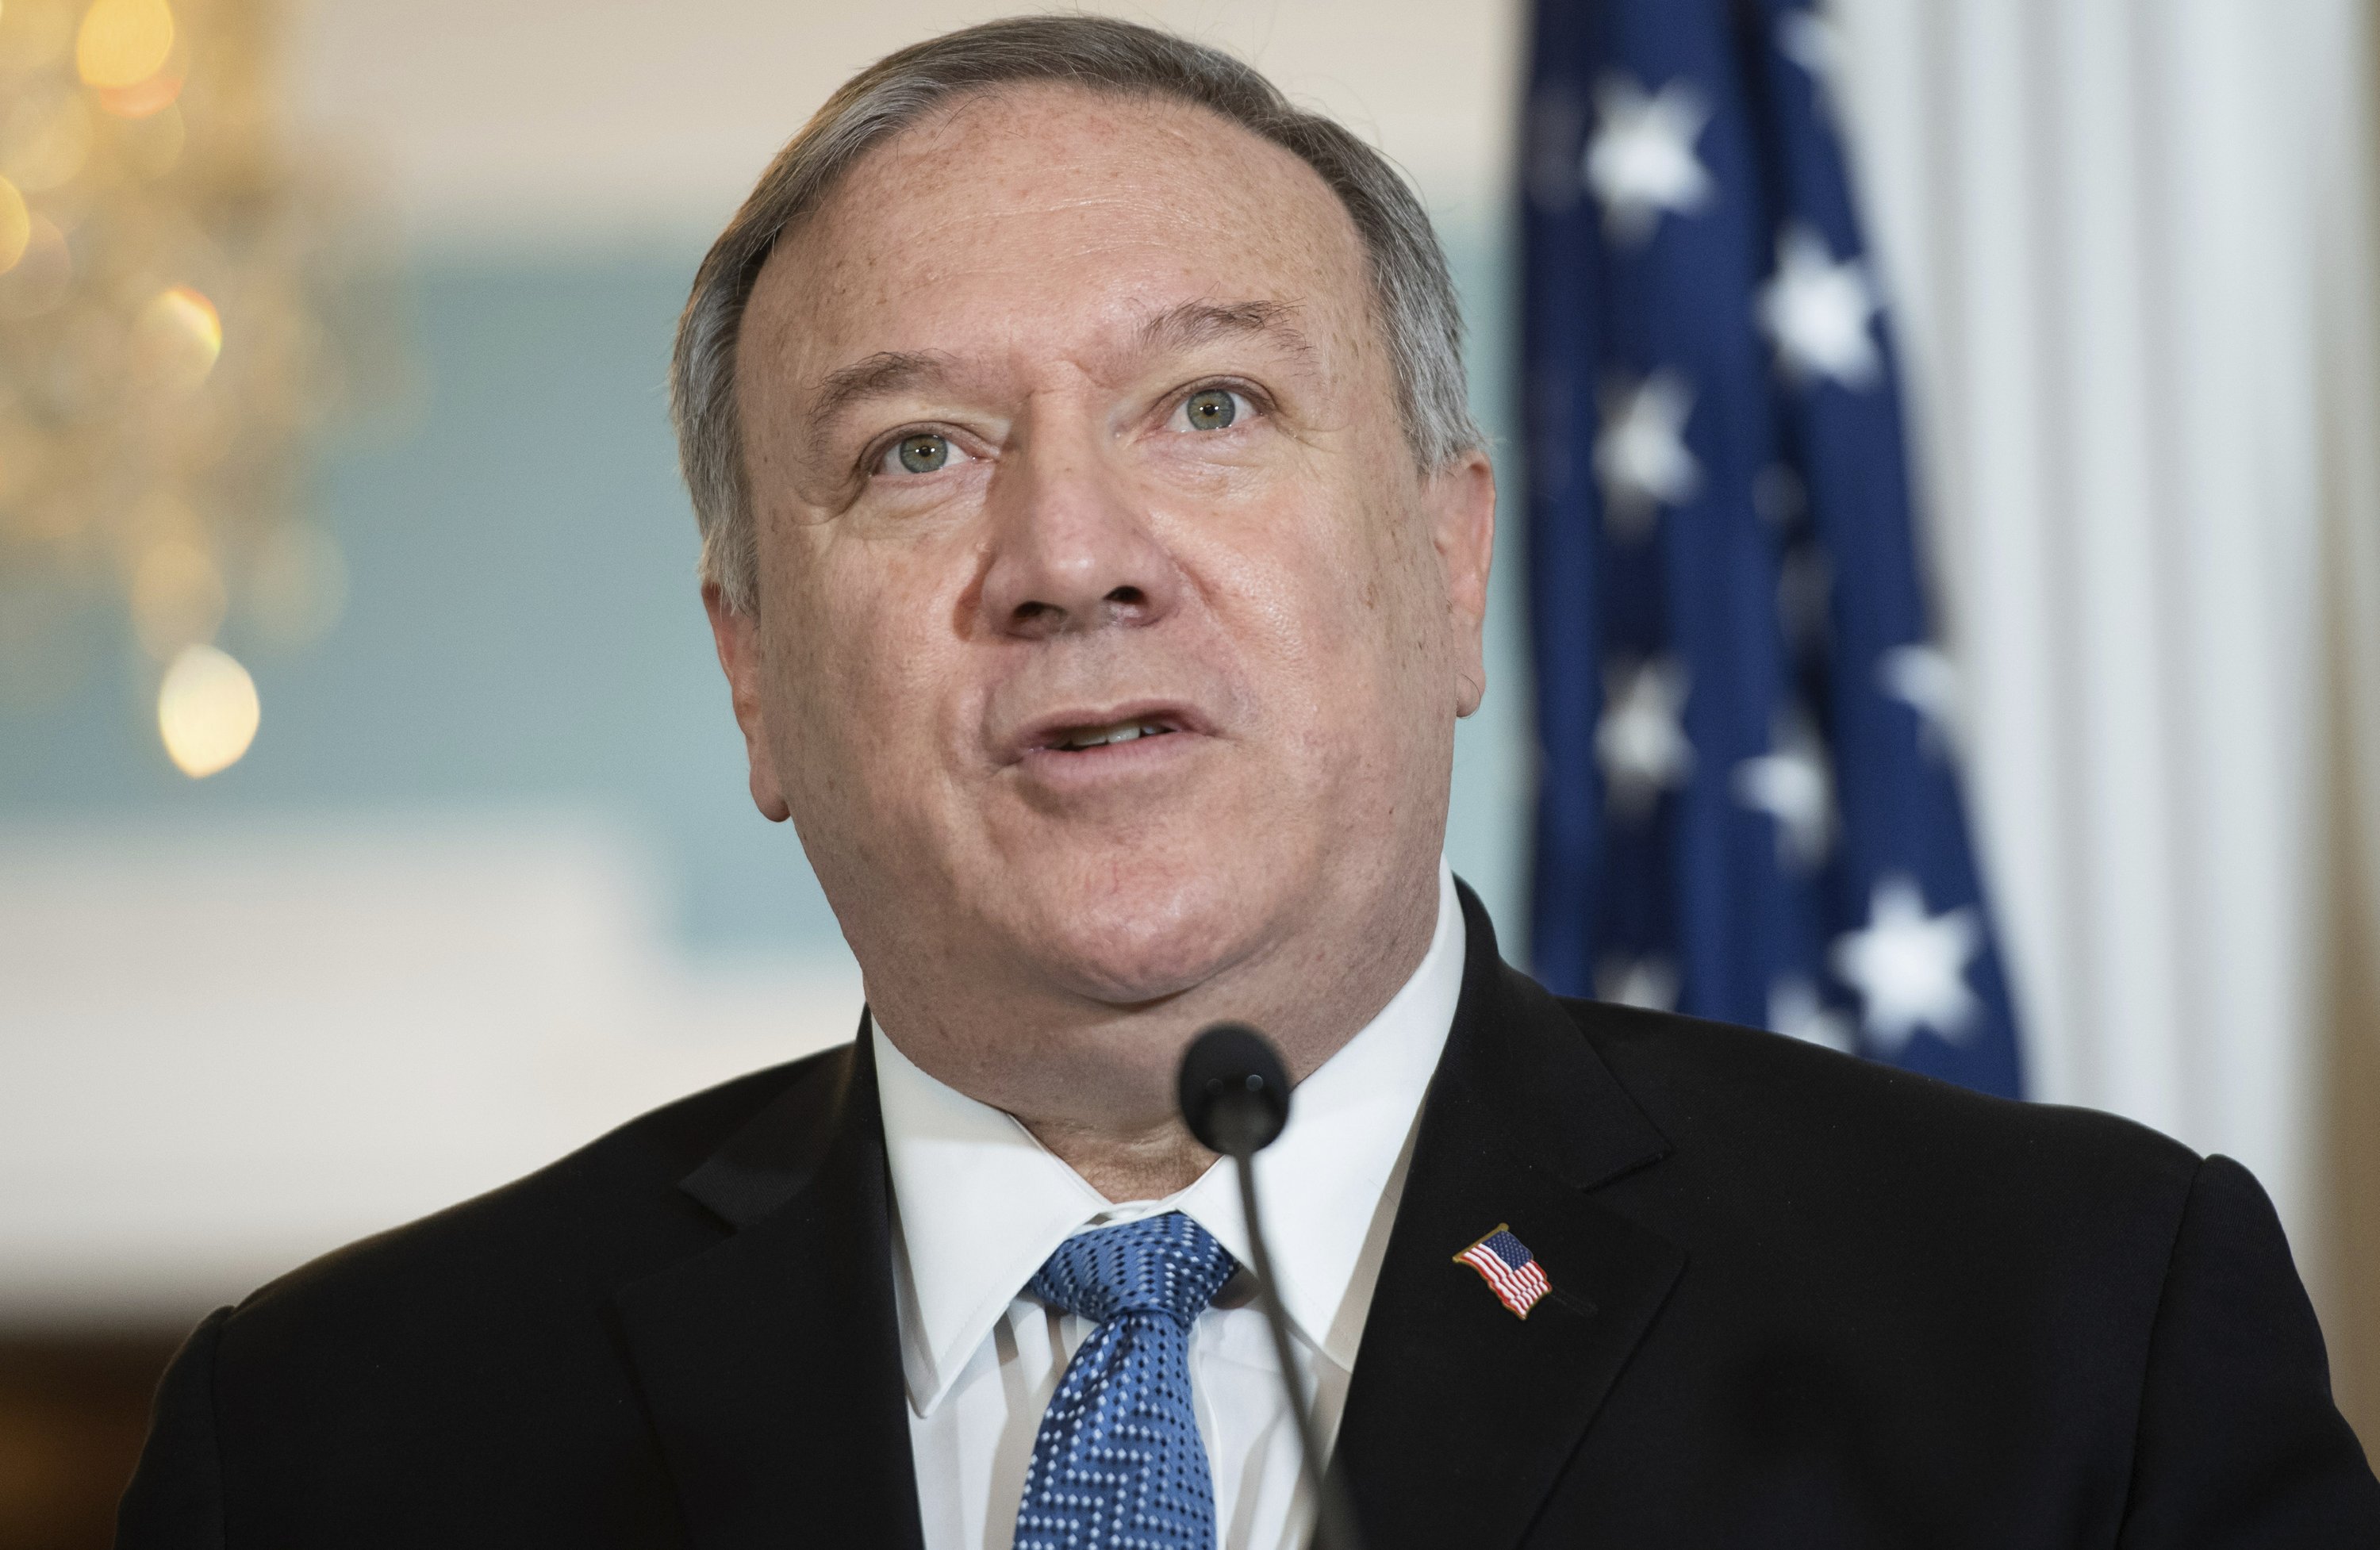 Chinese state media explode latest Pompeo move over Taiwan